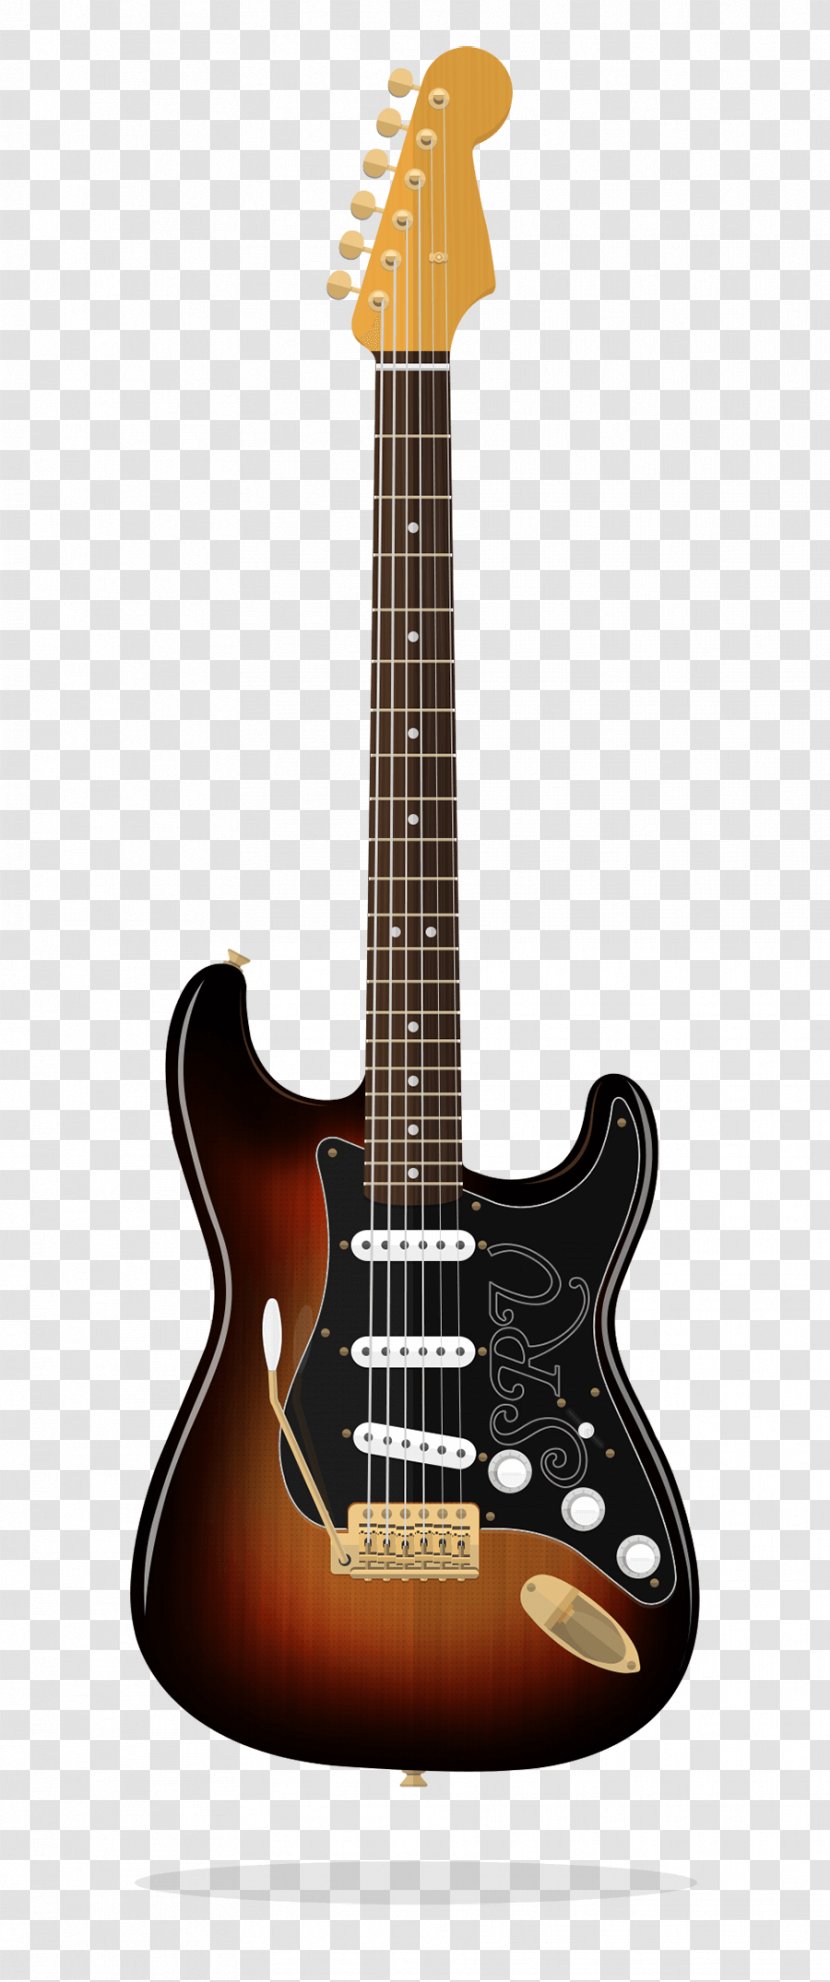 Fender Stratocaster Musical Instruments Corporation Electric Guitar Solid Body Custom Shop - Stevie Ray Vaughan Transparent PNG